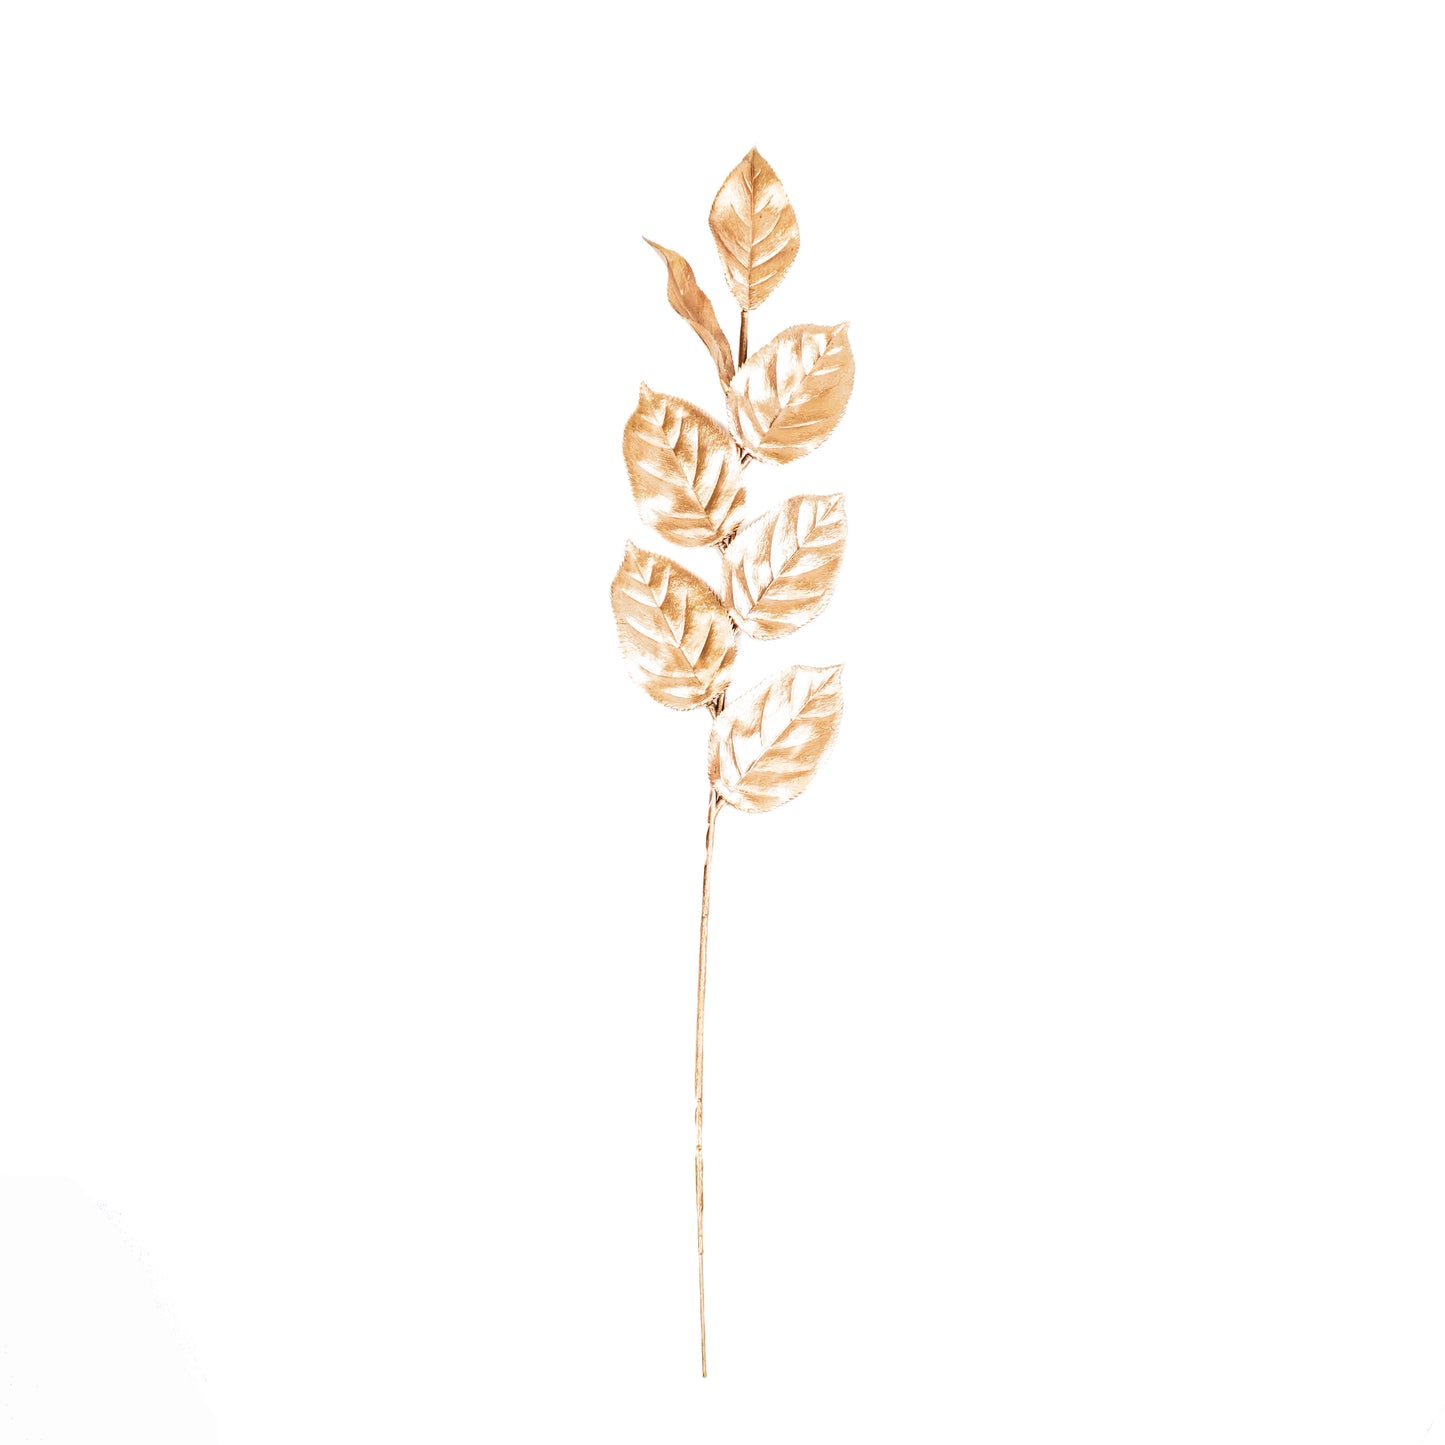 HV Golden Branch with leafs - 12 x 57 cm - Polysterene